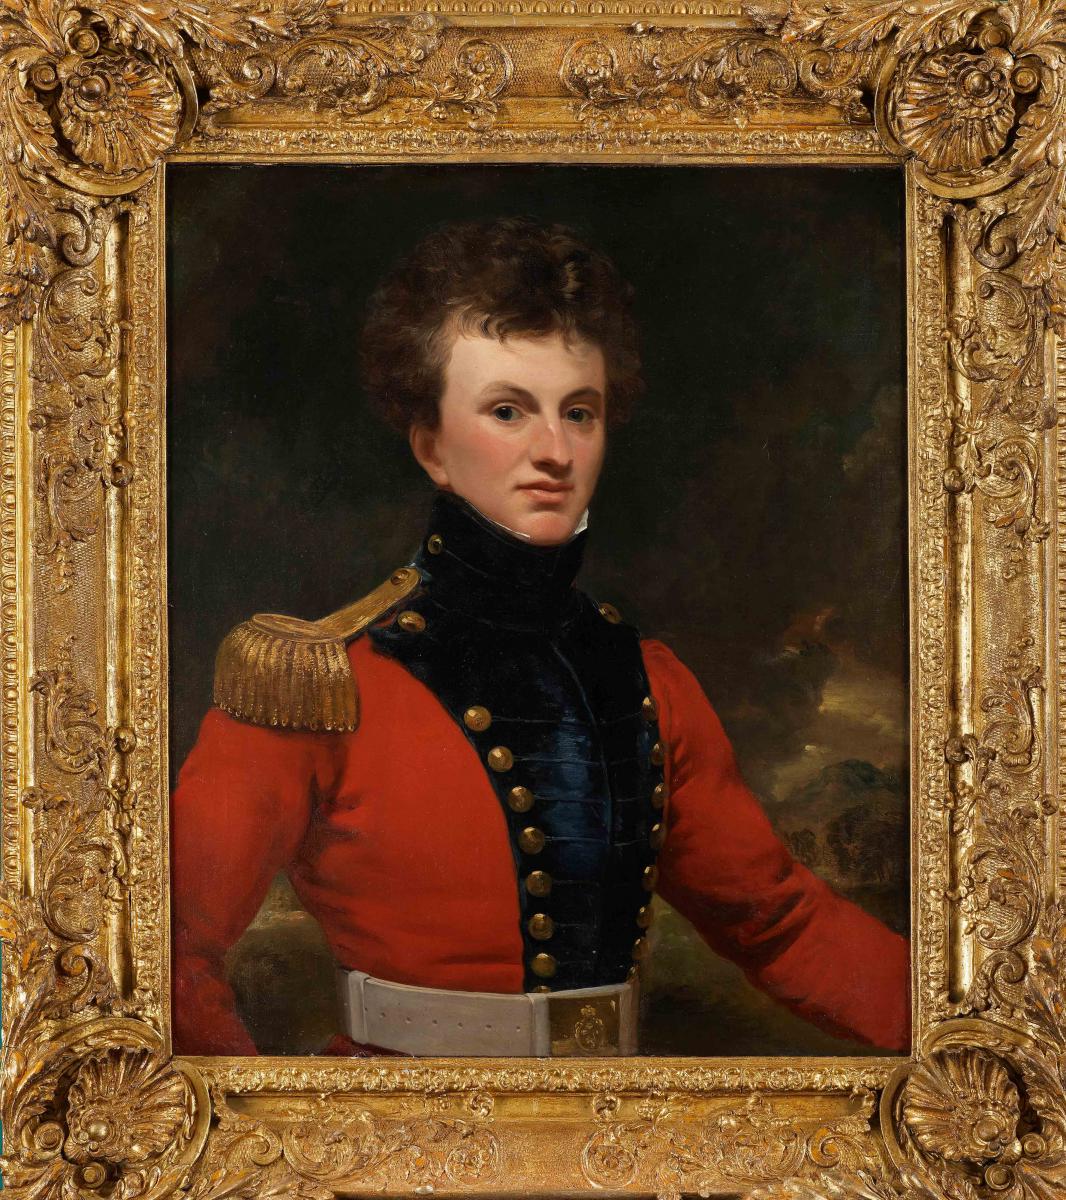 Sir George Hayter (1792-1871), Portrait of an Officer of the East India Company